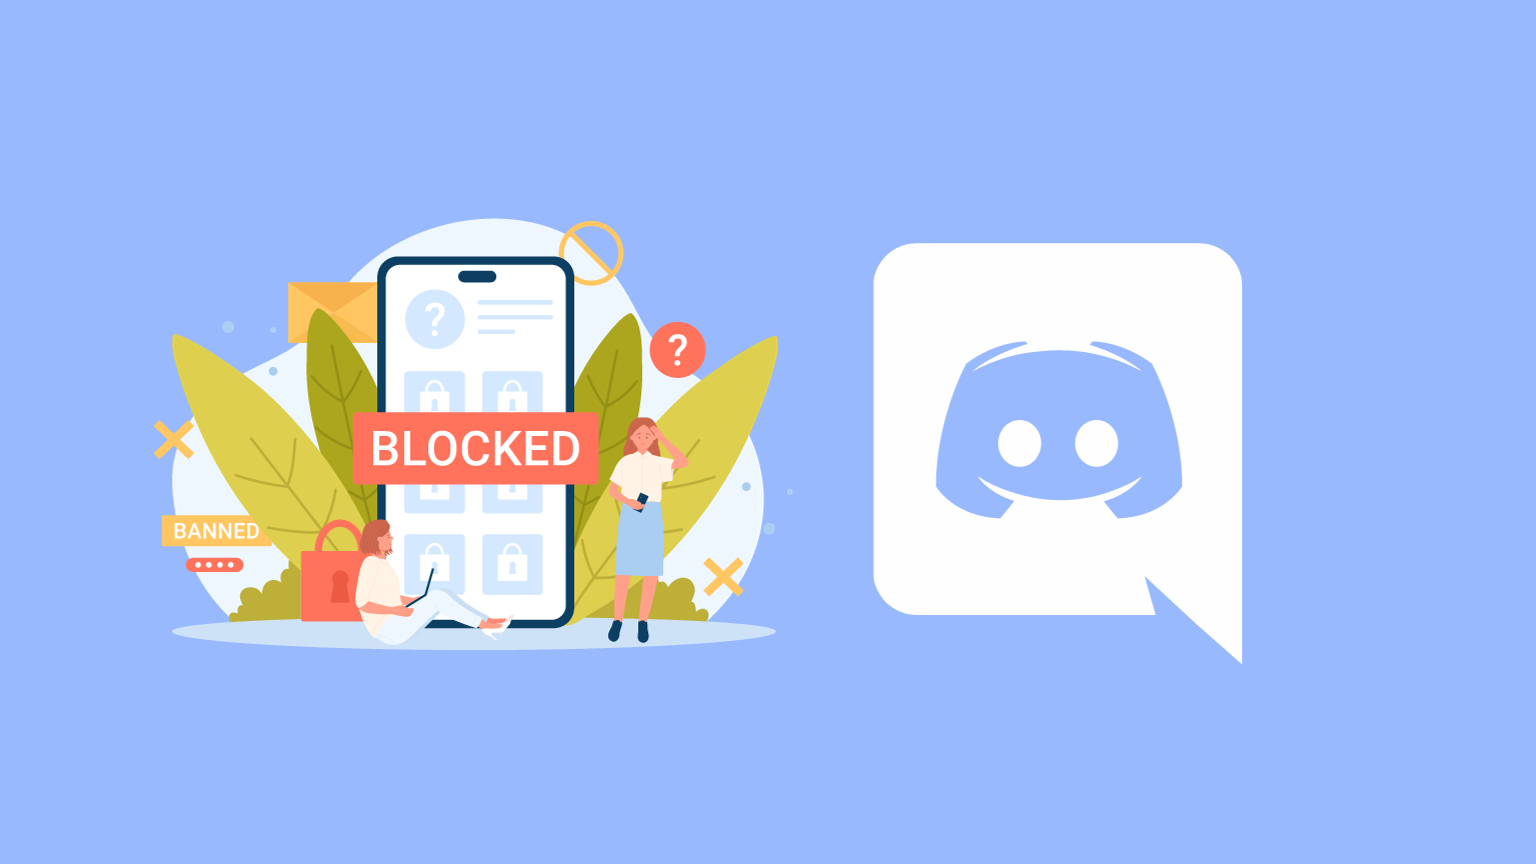 How to see blocked users on Discord